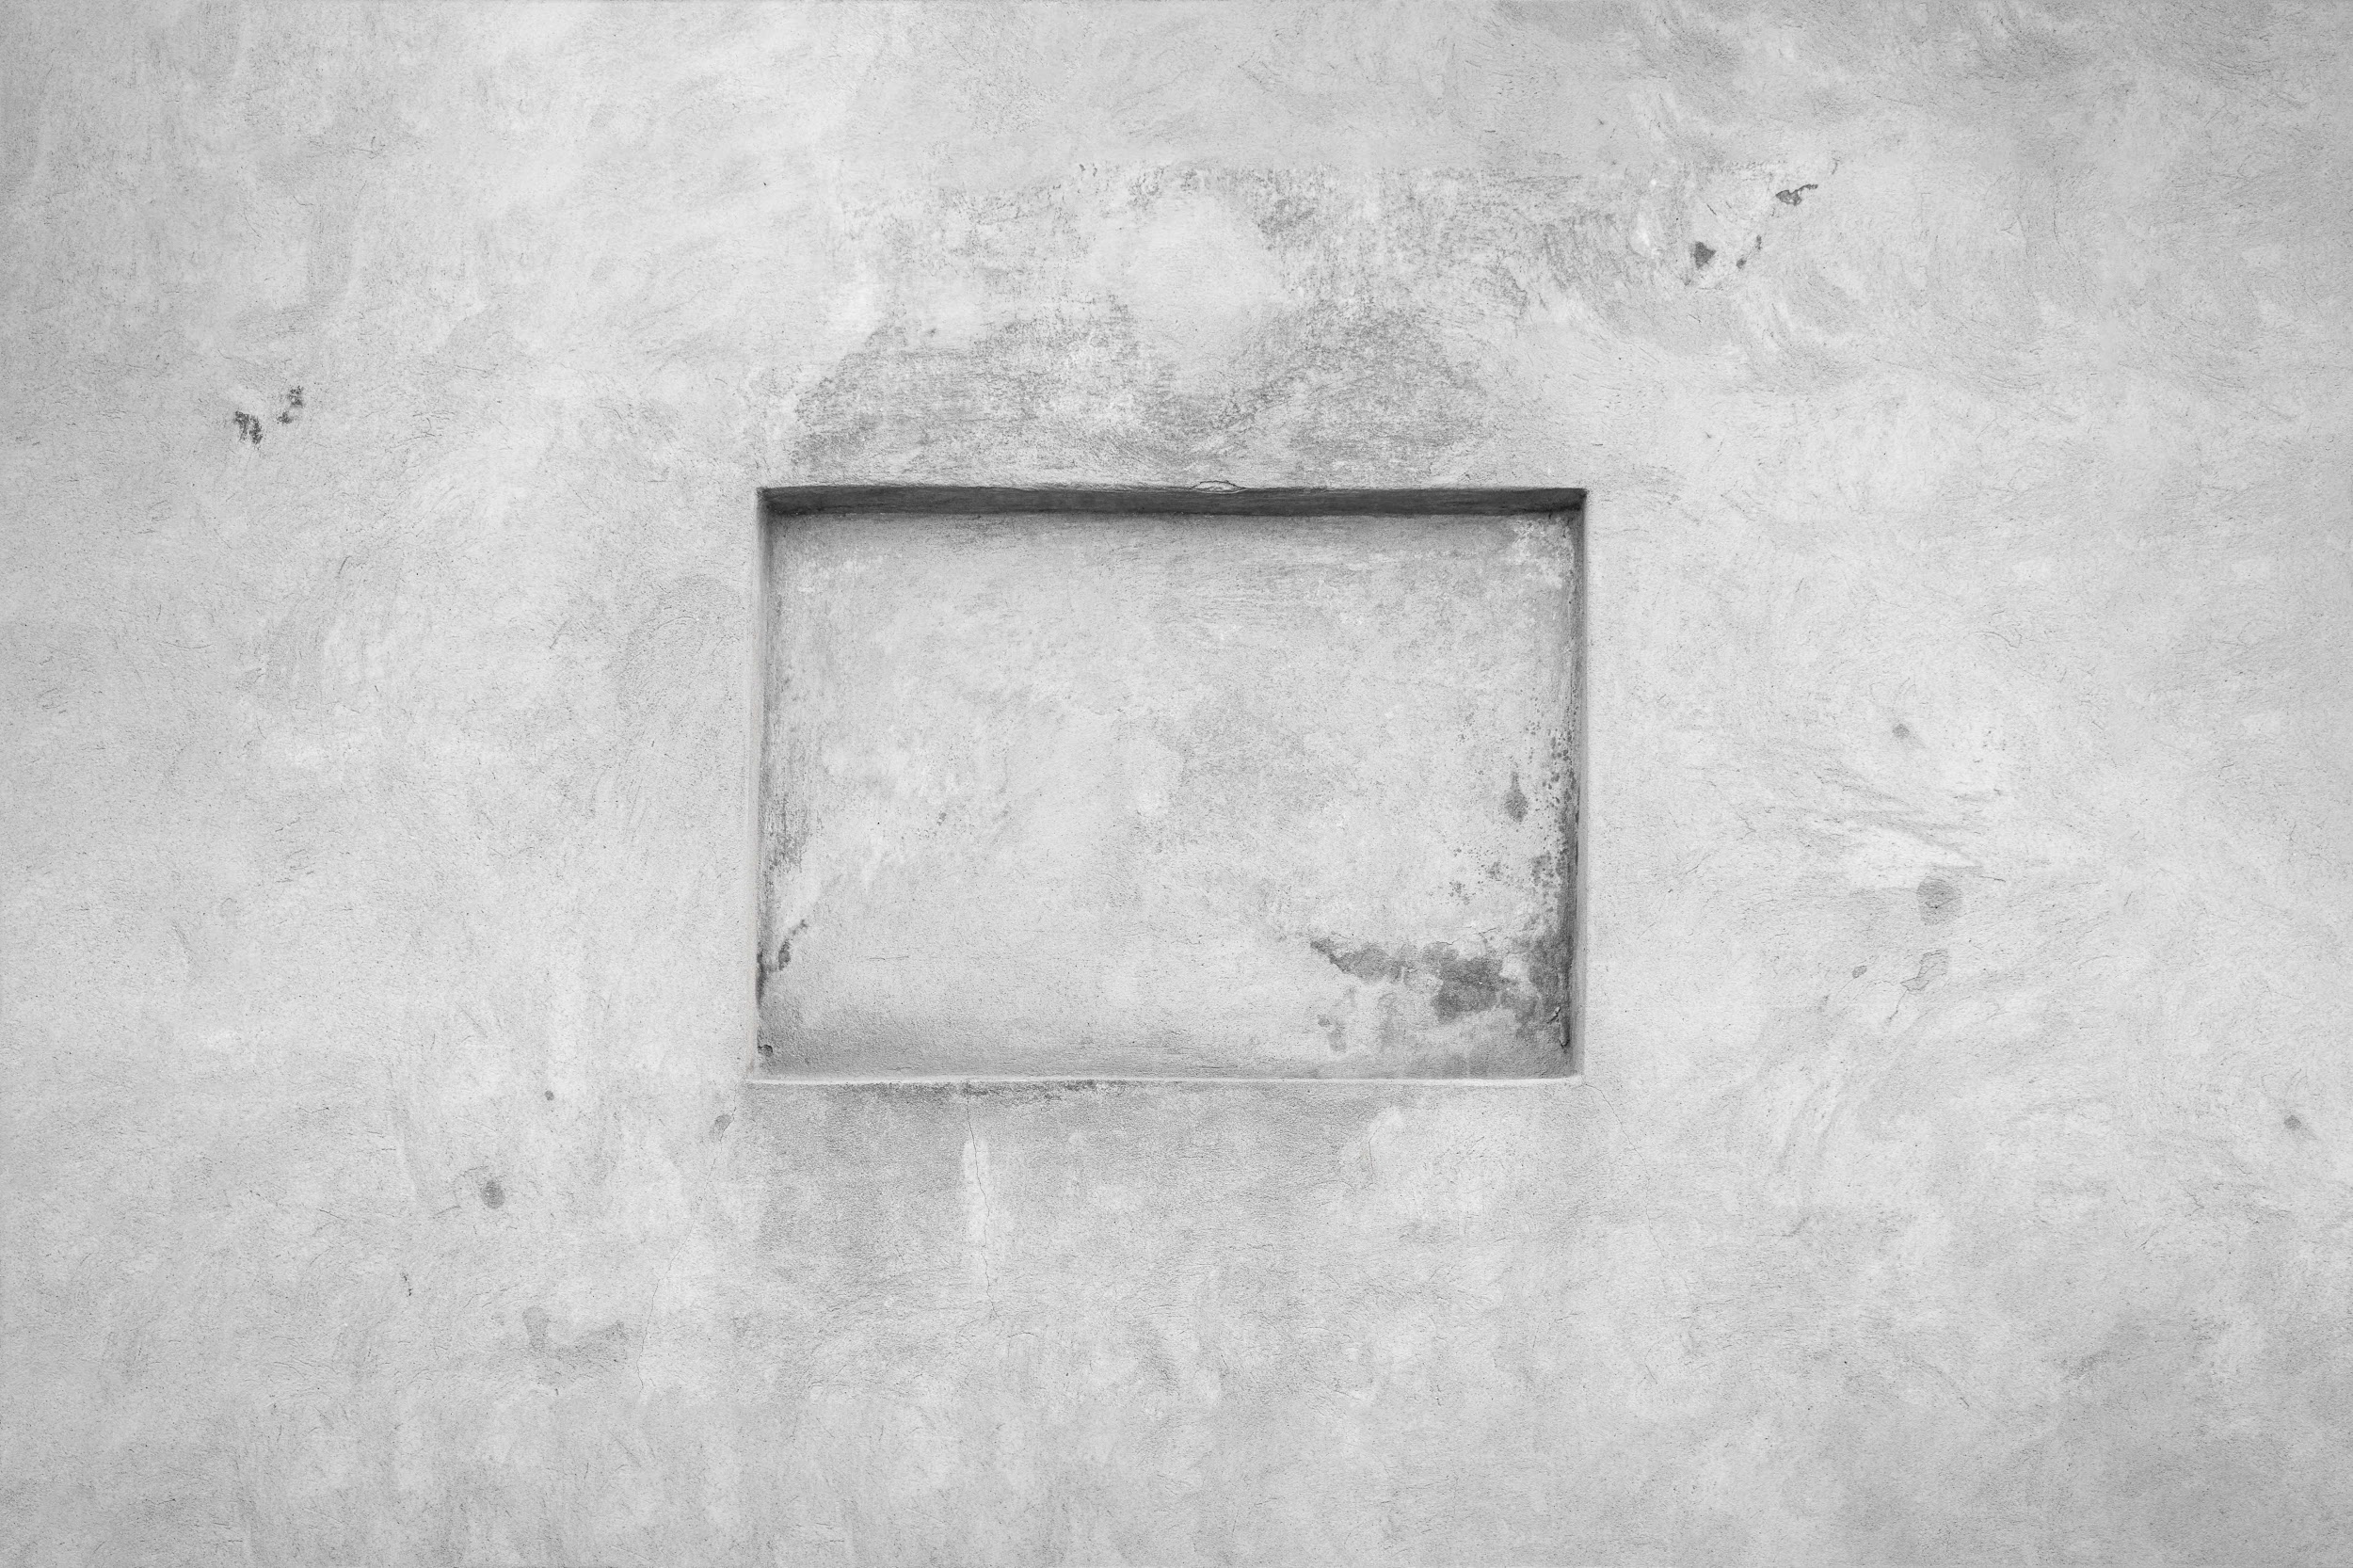 An image of a gray concrete wall with a small, shallow niche in the middle of it